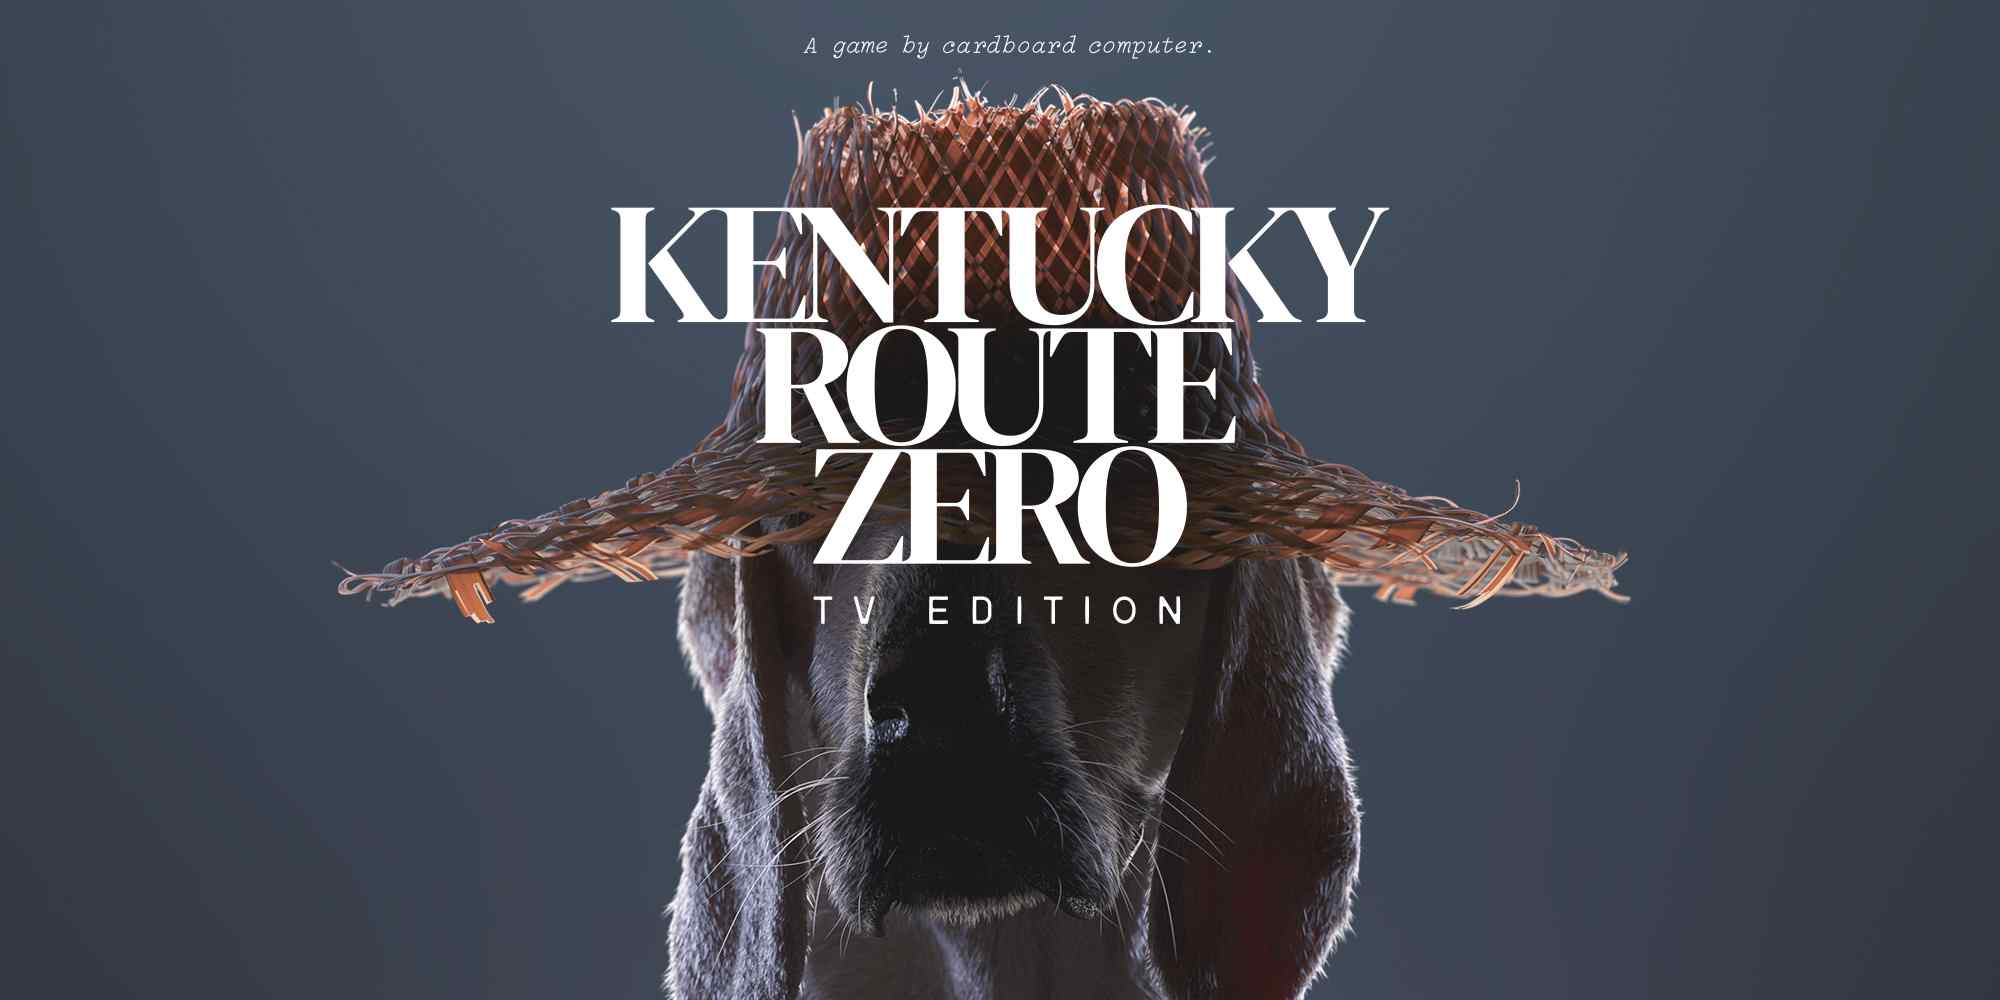 Kentucky Route Zero is a strange point-and-click adventure game made by Cardboard Computer and released in five parts between 2013 and 2020.